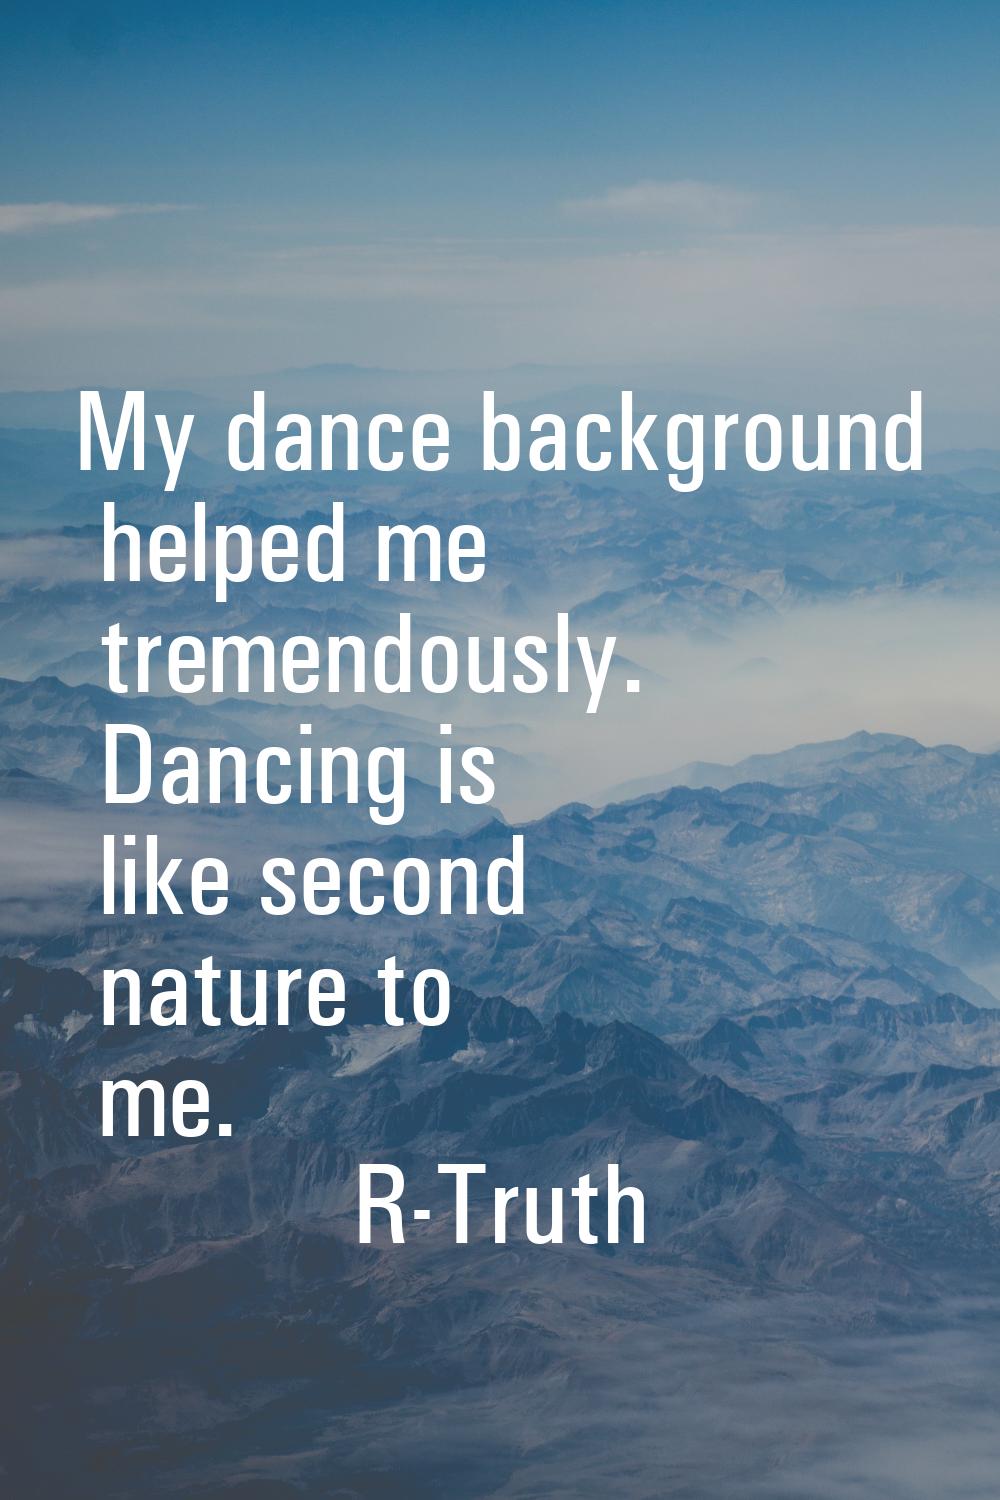 My dance background helped me tremendously. Dancing is like second nature to me.